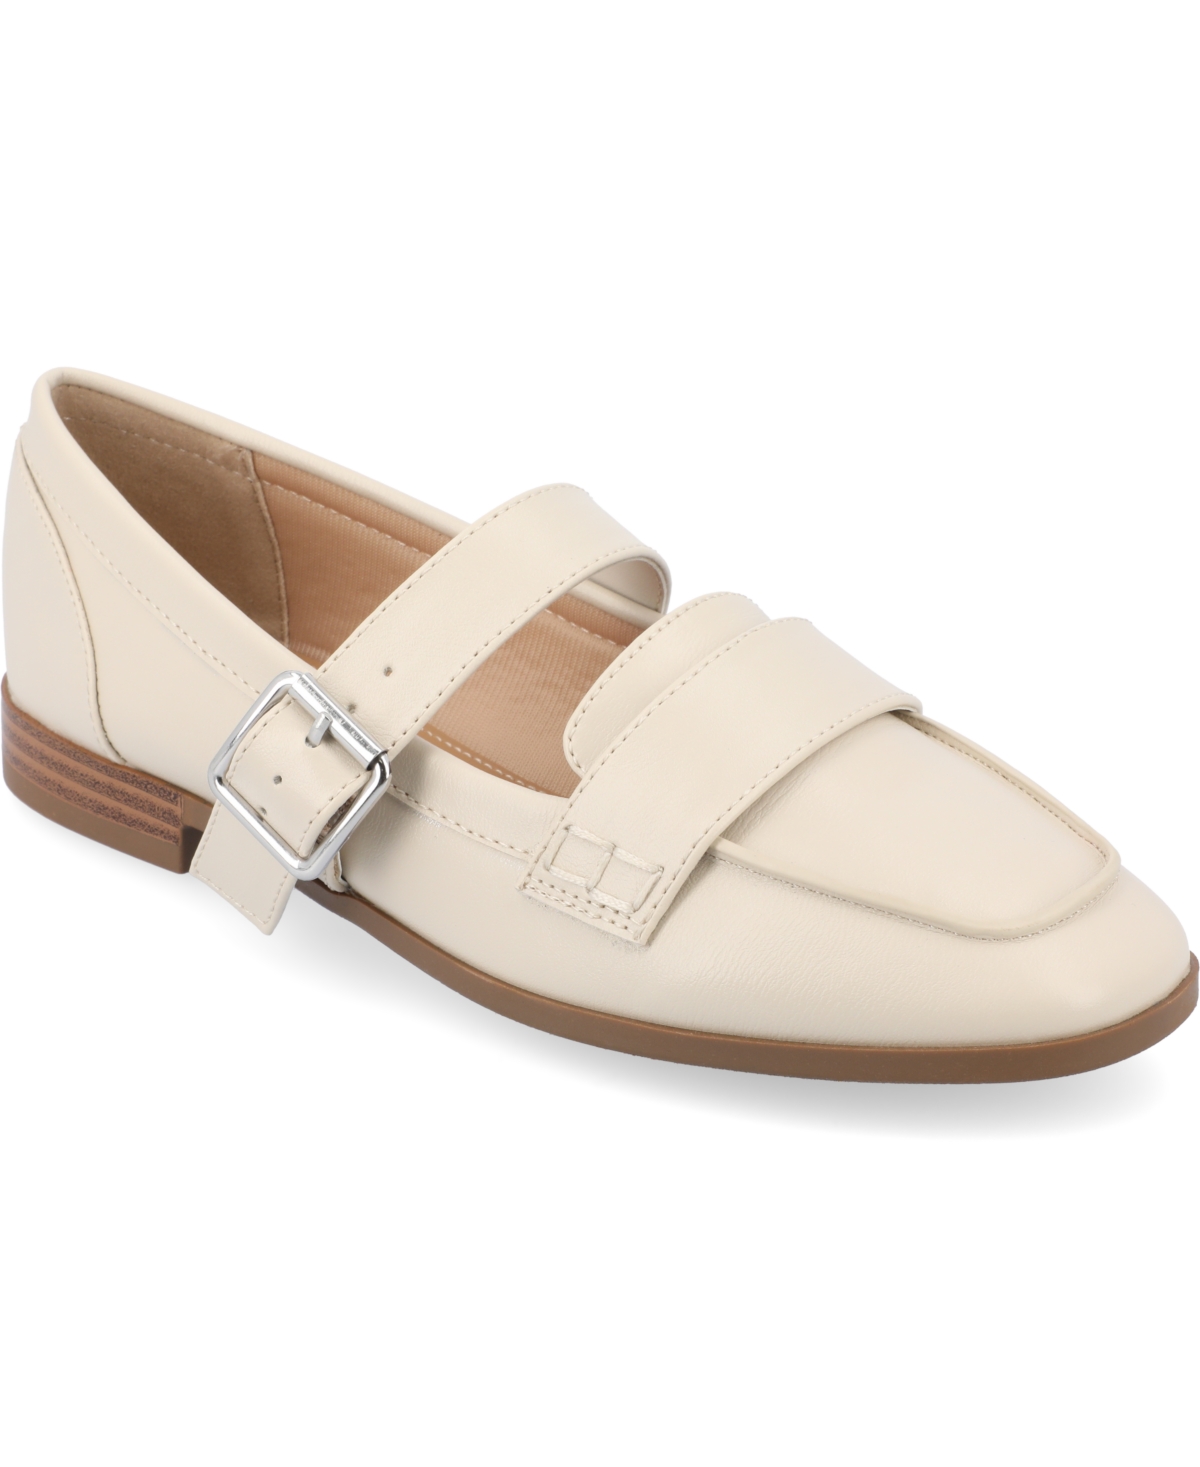 Women's Caspian Buckle Loafers - Taupe, Suede